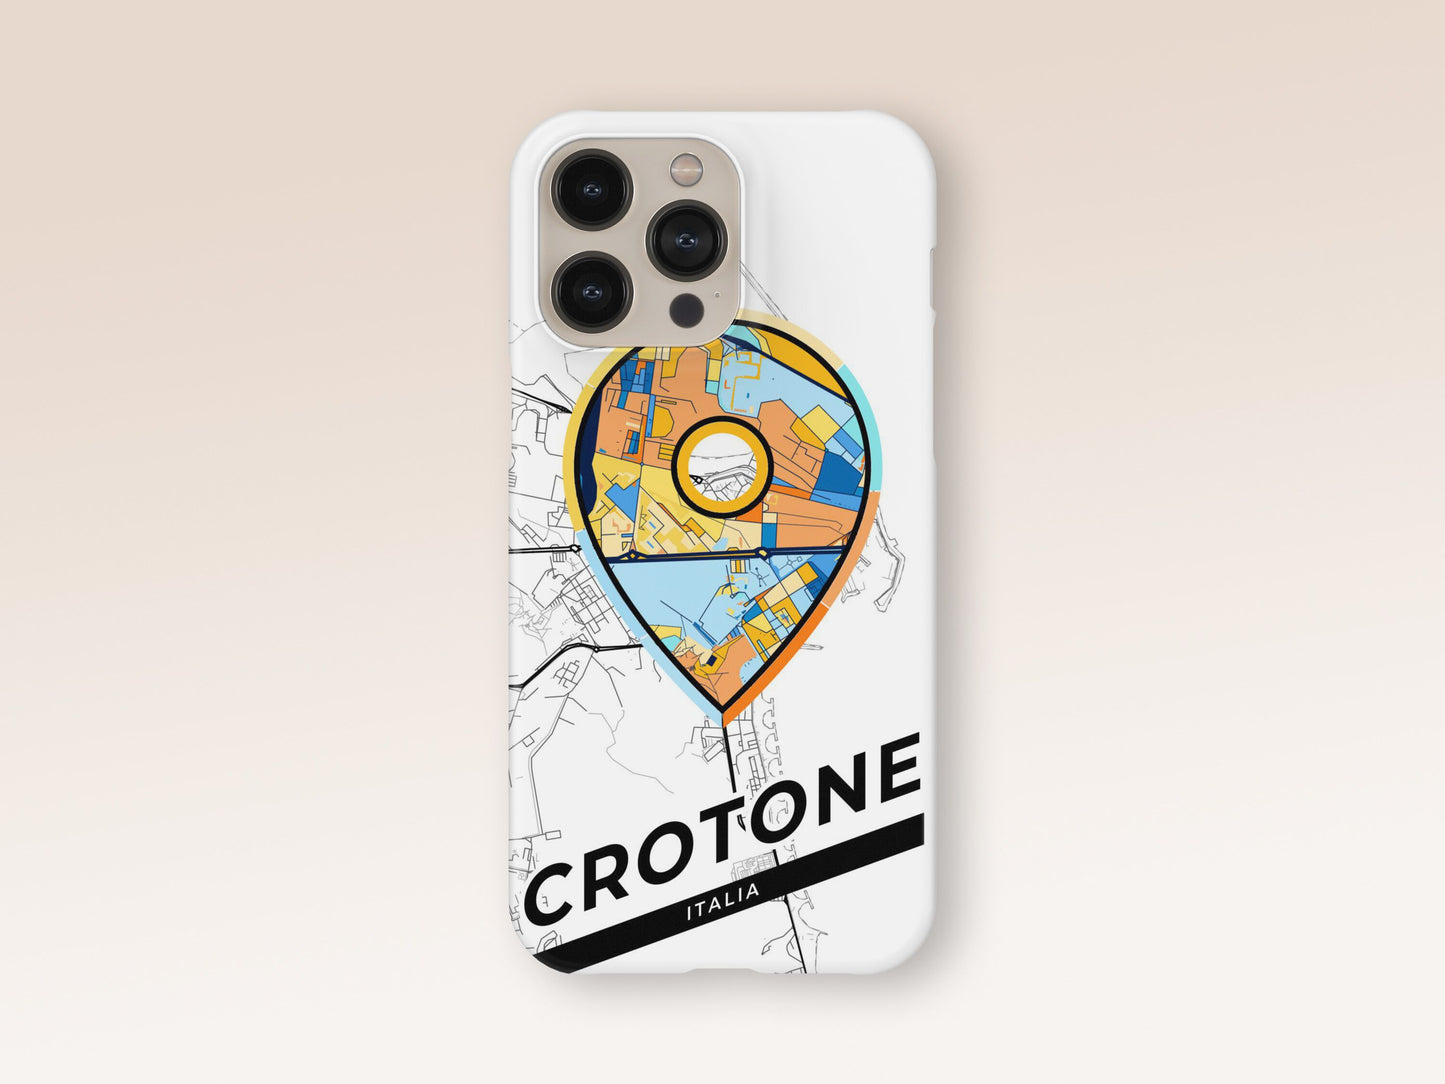 Crotone Italy slim phone case with colorful icon. Birthday, wedding or housewarming gift. Couple match cases. 1